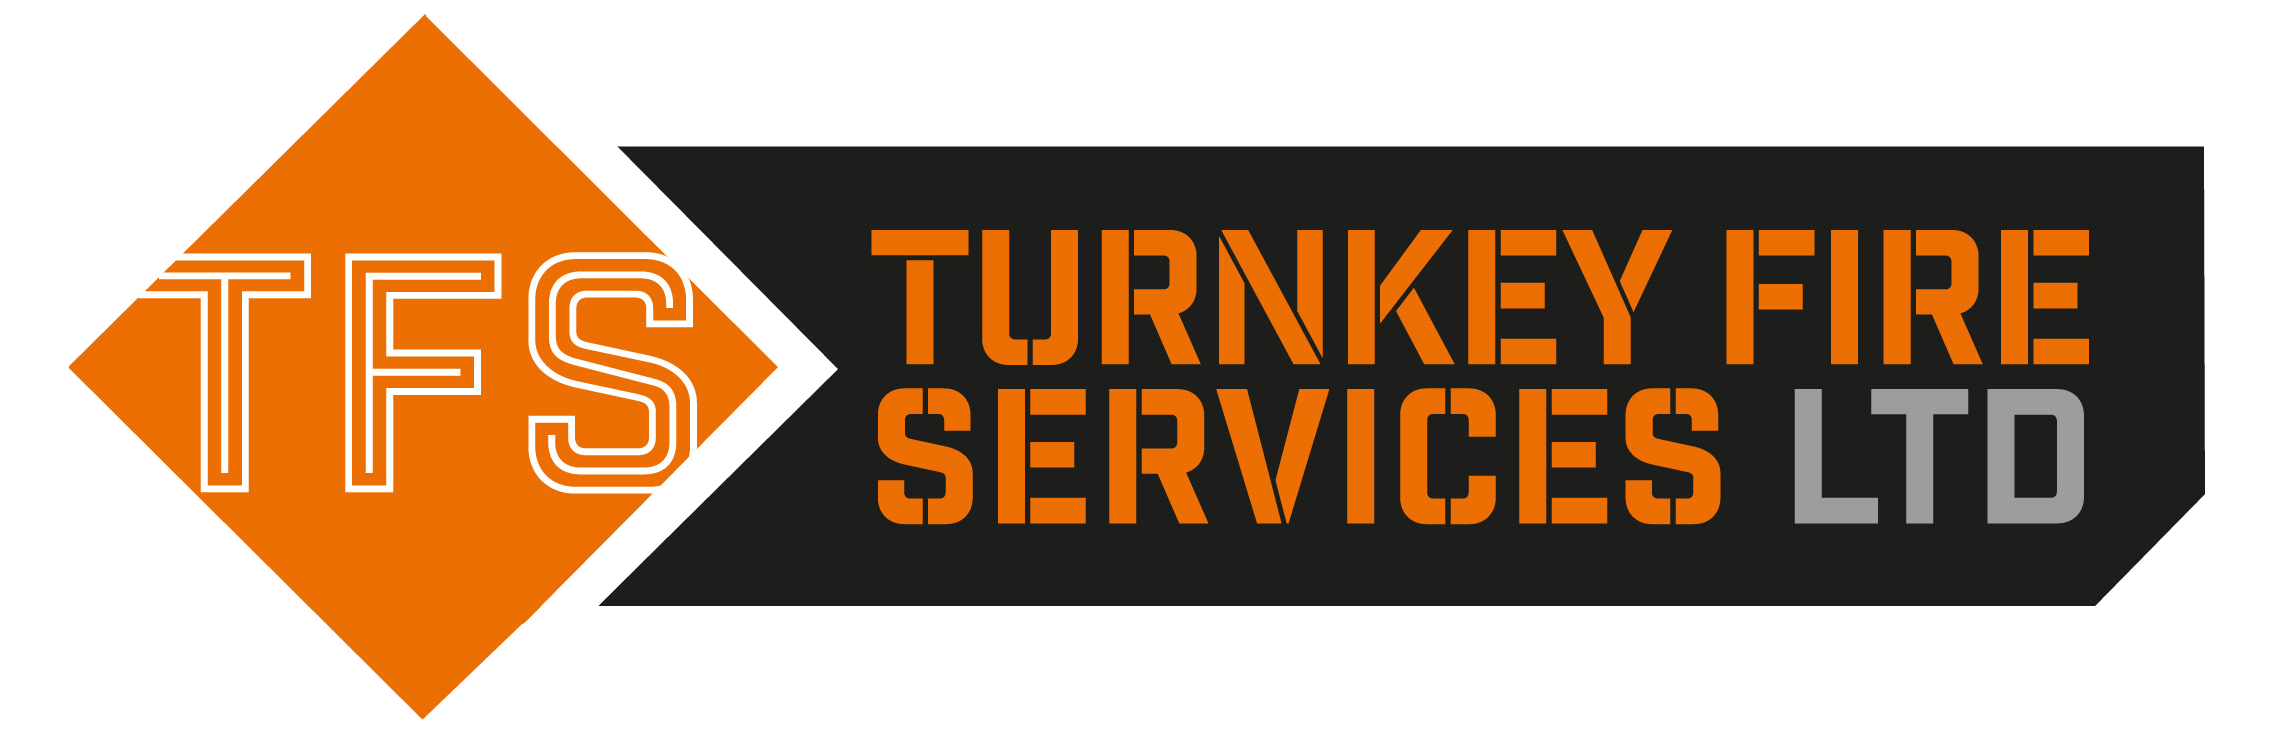 Turnkey Fire Services